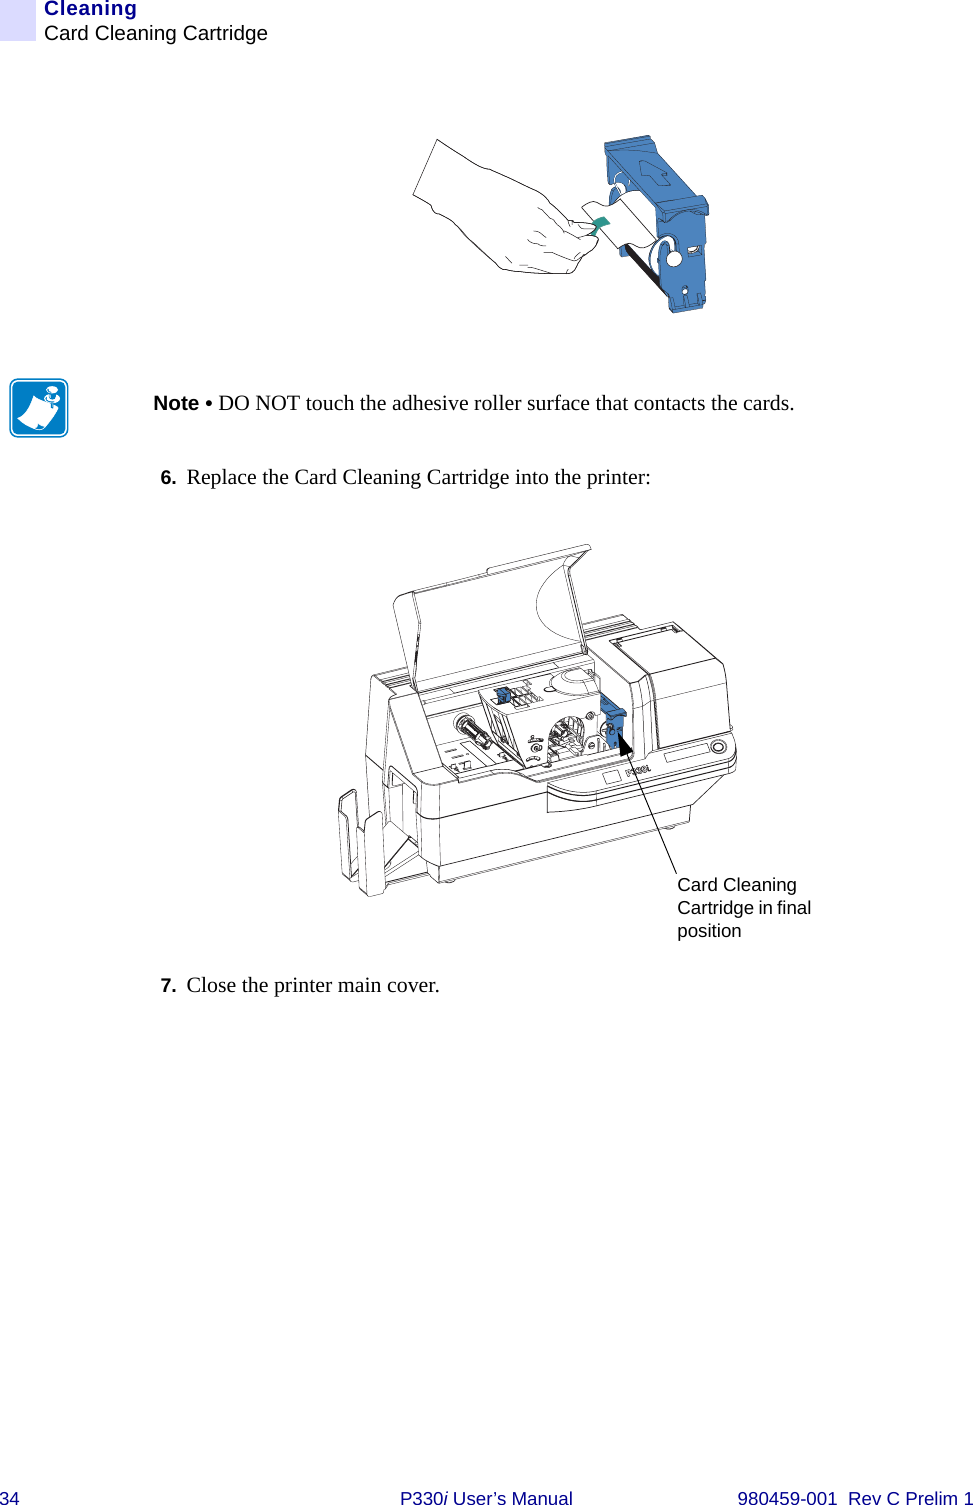 34 P330i User’s Manual 980459-001  Rev C Prelim 1CleaningCard Cleaning Cartridge6. Replace the Card Cleaning Cartridge into the printer:7. Close the printer main cover.Note • DO NOT touch the adhesive roller surface that contacts the cards.Card Cleaning Cartridge in final position